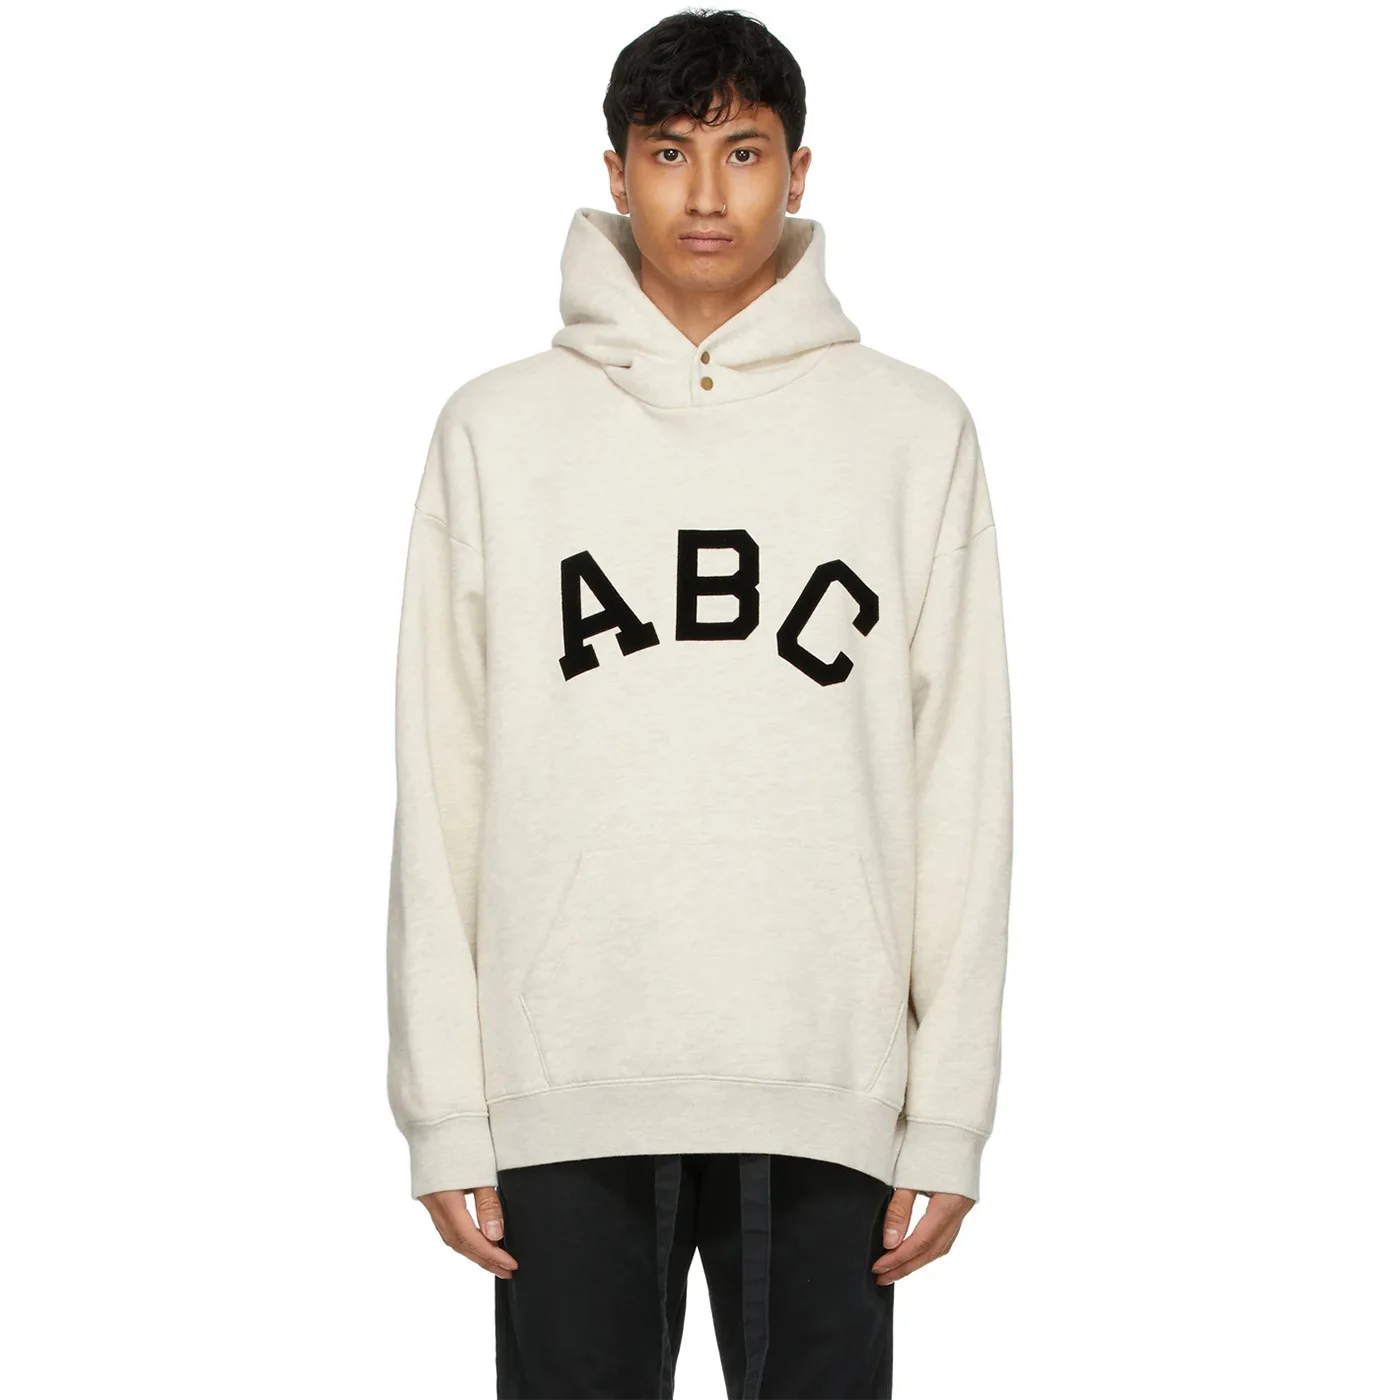 

ESSENTIALS ABC Henry Collared Hoodie High Street Jersey For Men And Women Season 7 Main Line Best Quality A Hooded Sports Hoodie